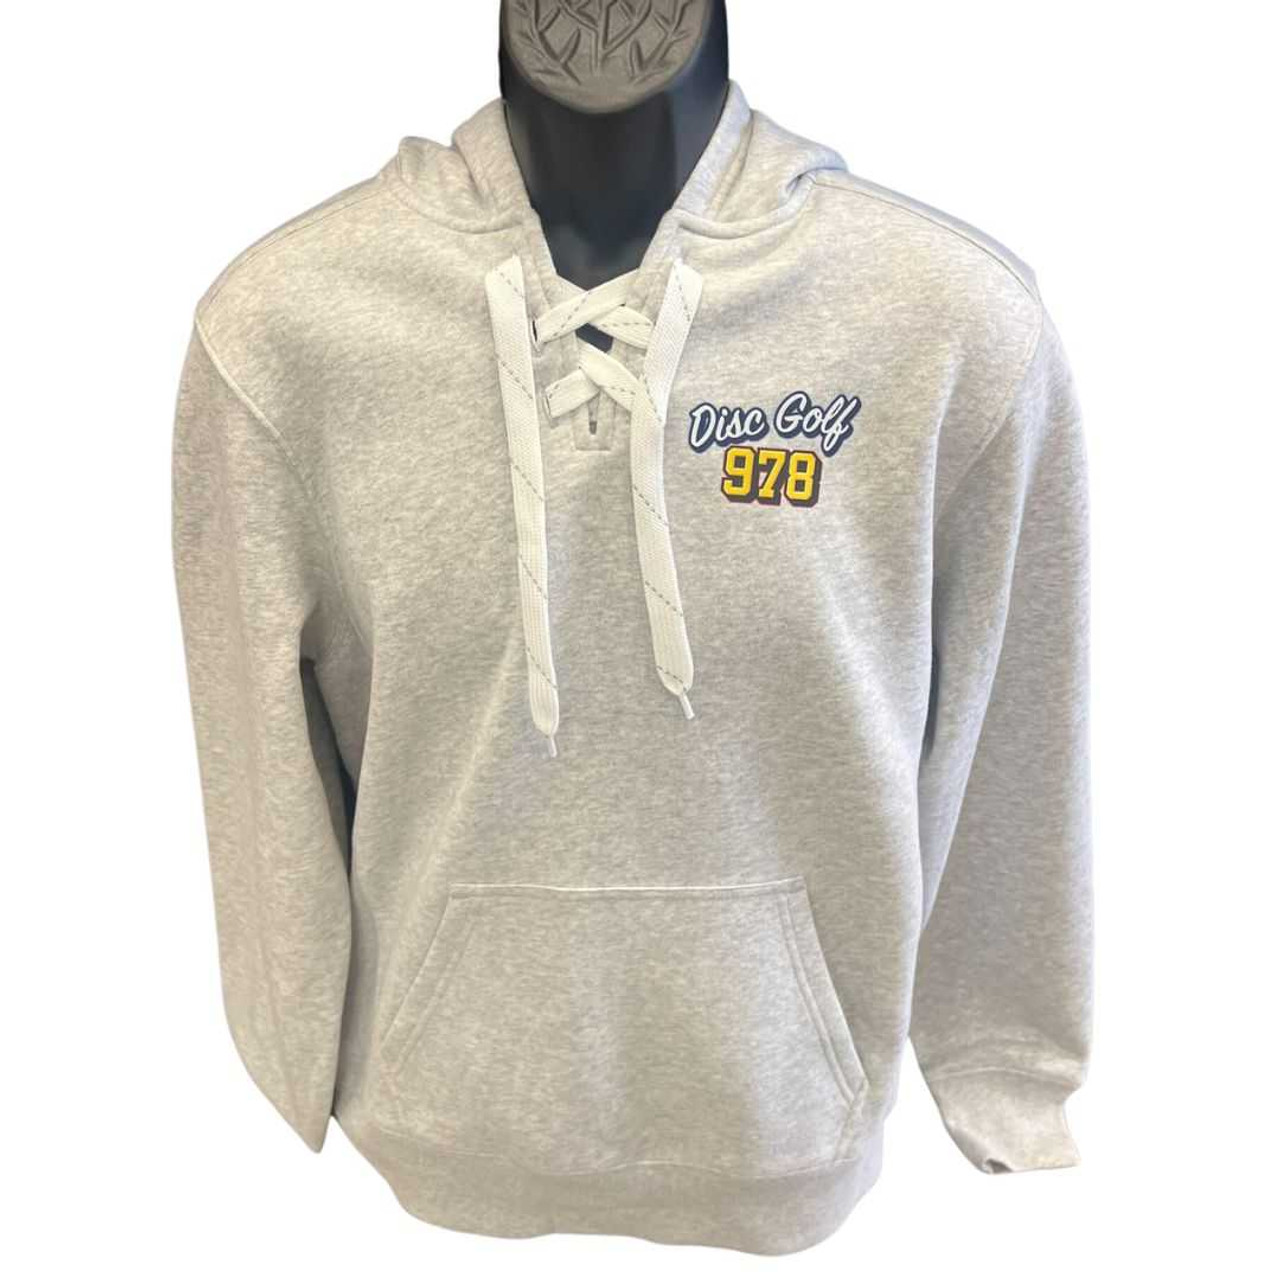 Disc Golf 978 Lace Up Pullover Hooded Sweat Shirt - Light Gray